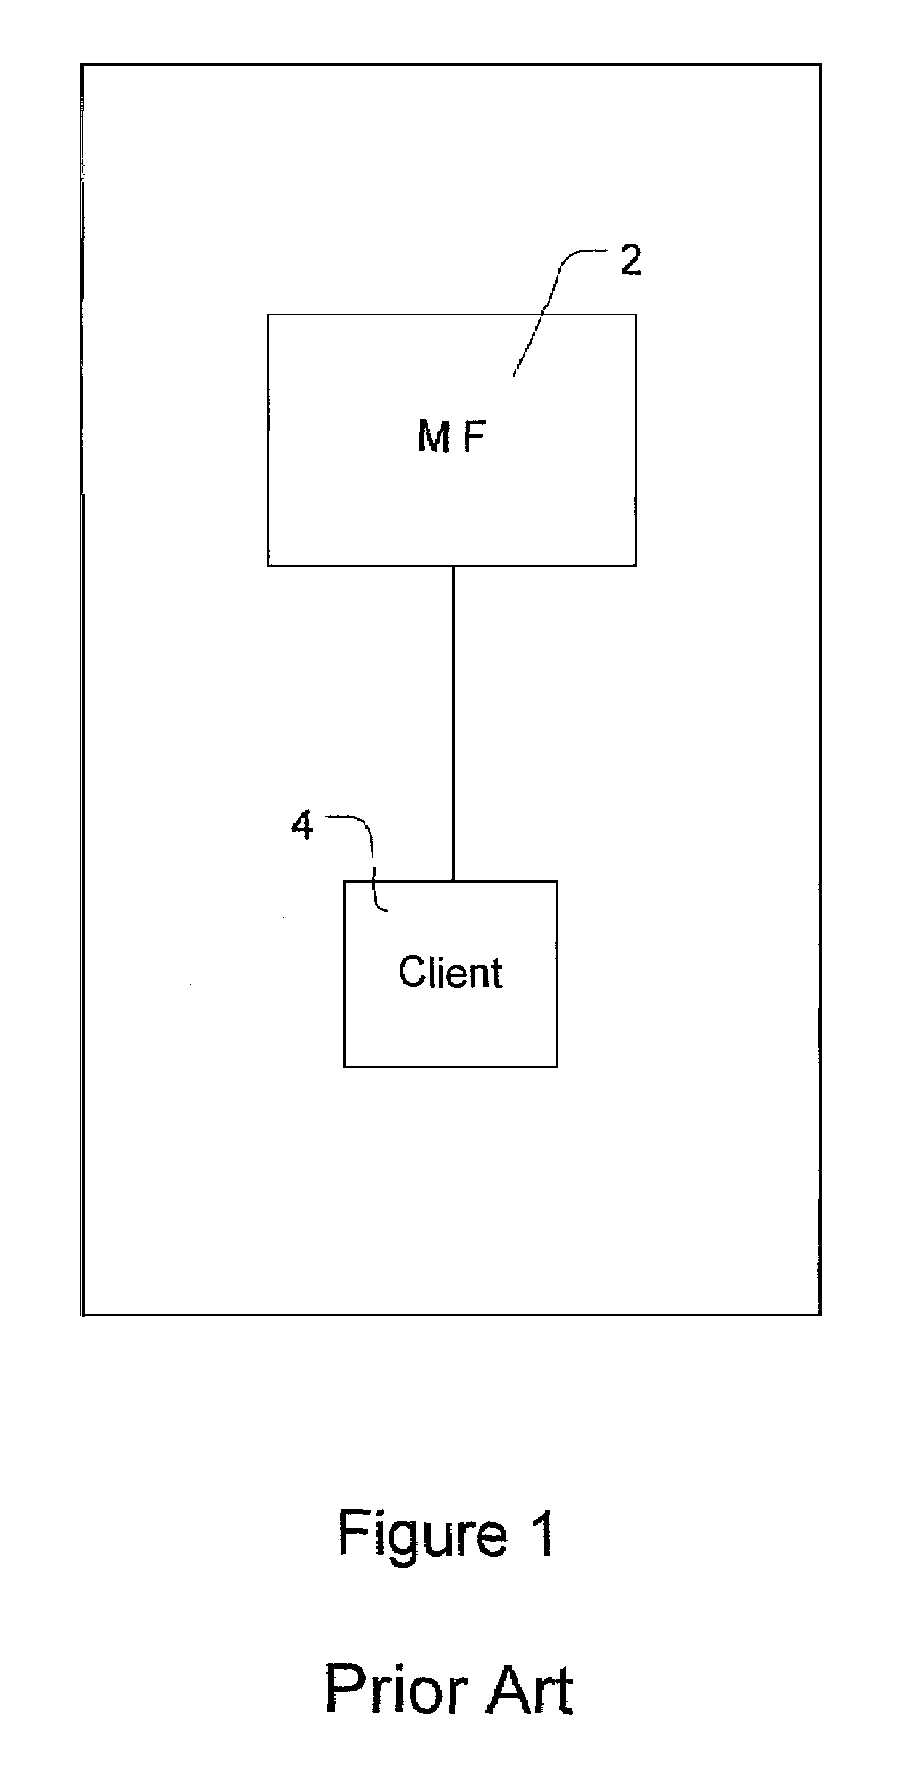 System and method for expediting and automating mainframe computer setup